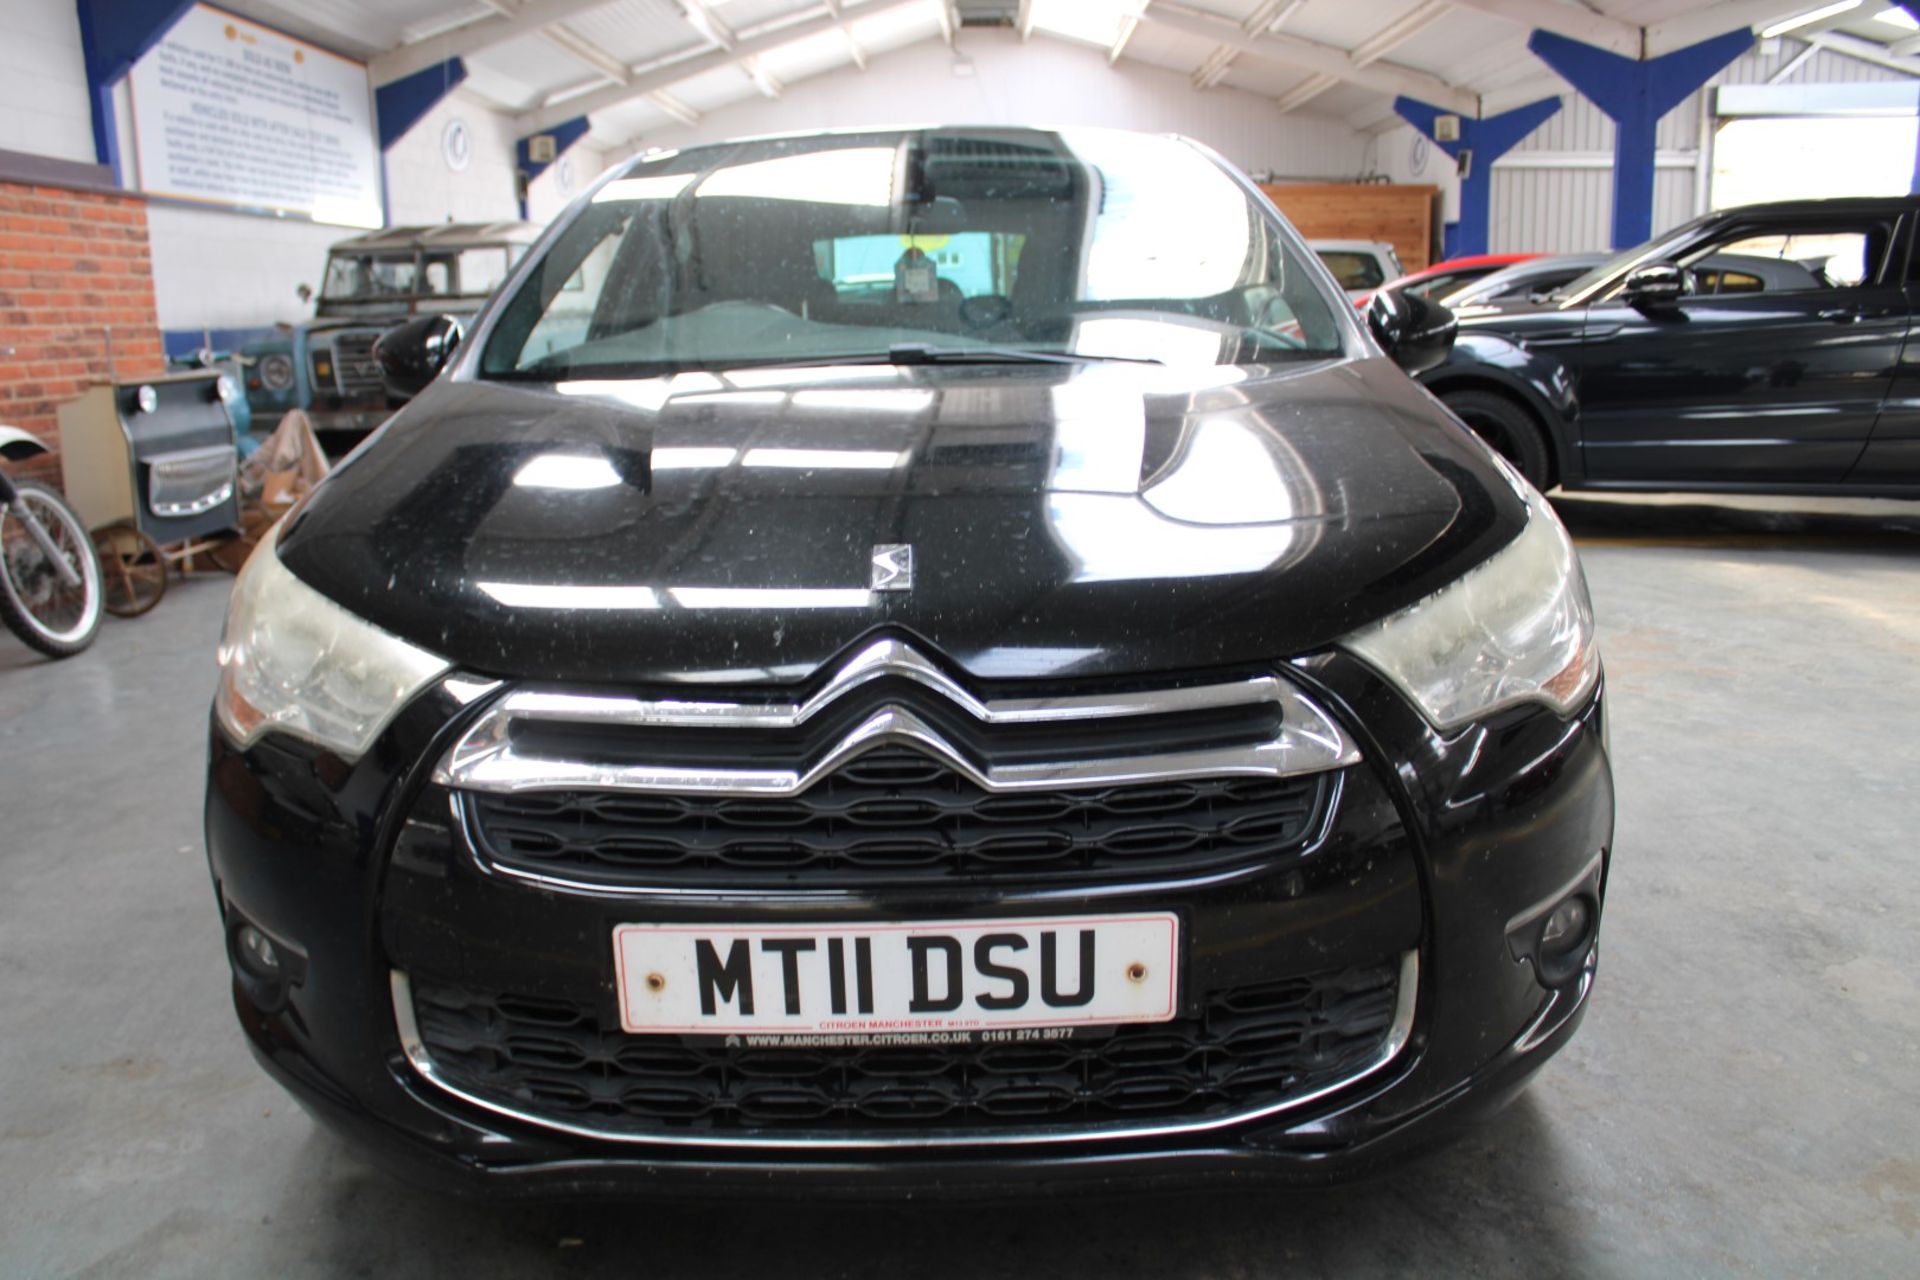 11 11 Citroen DS4 DStyle HDI - Image 2 of 35